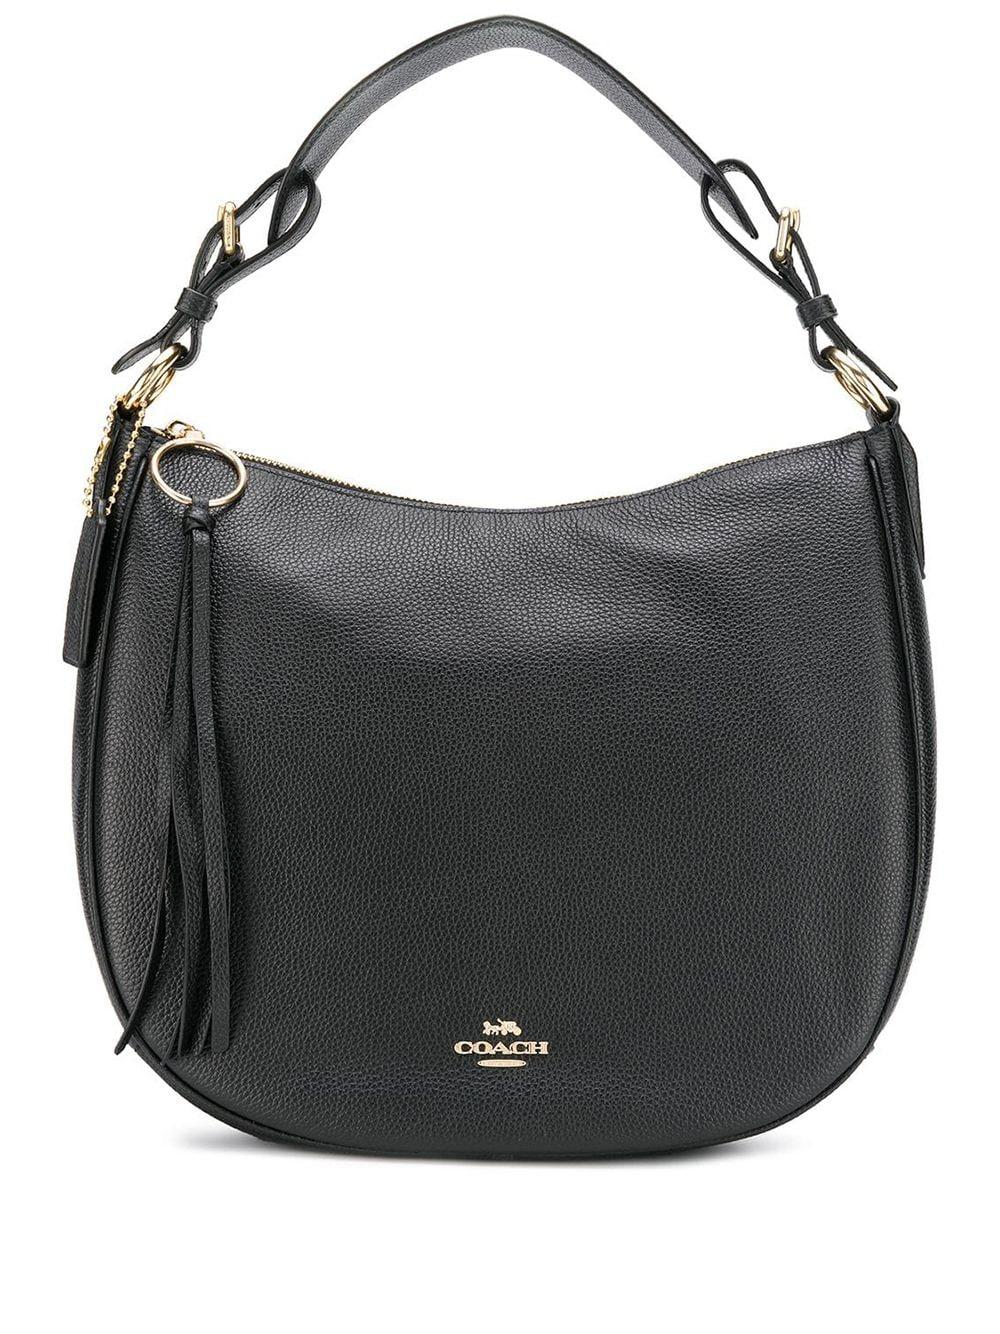 COACH Leather Sutton Hobo Bag in Black - Lyst